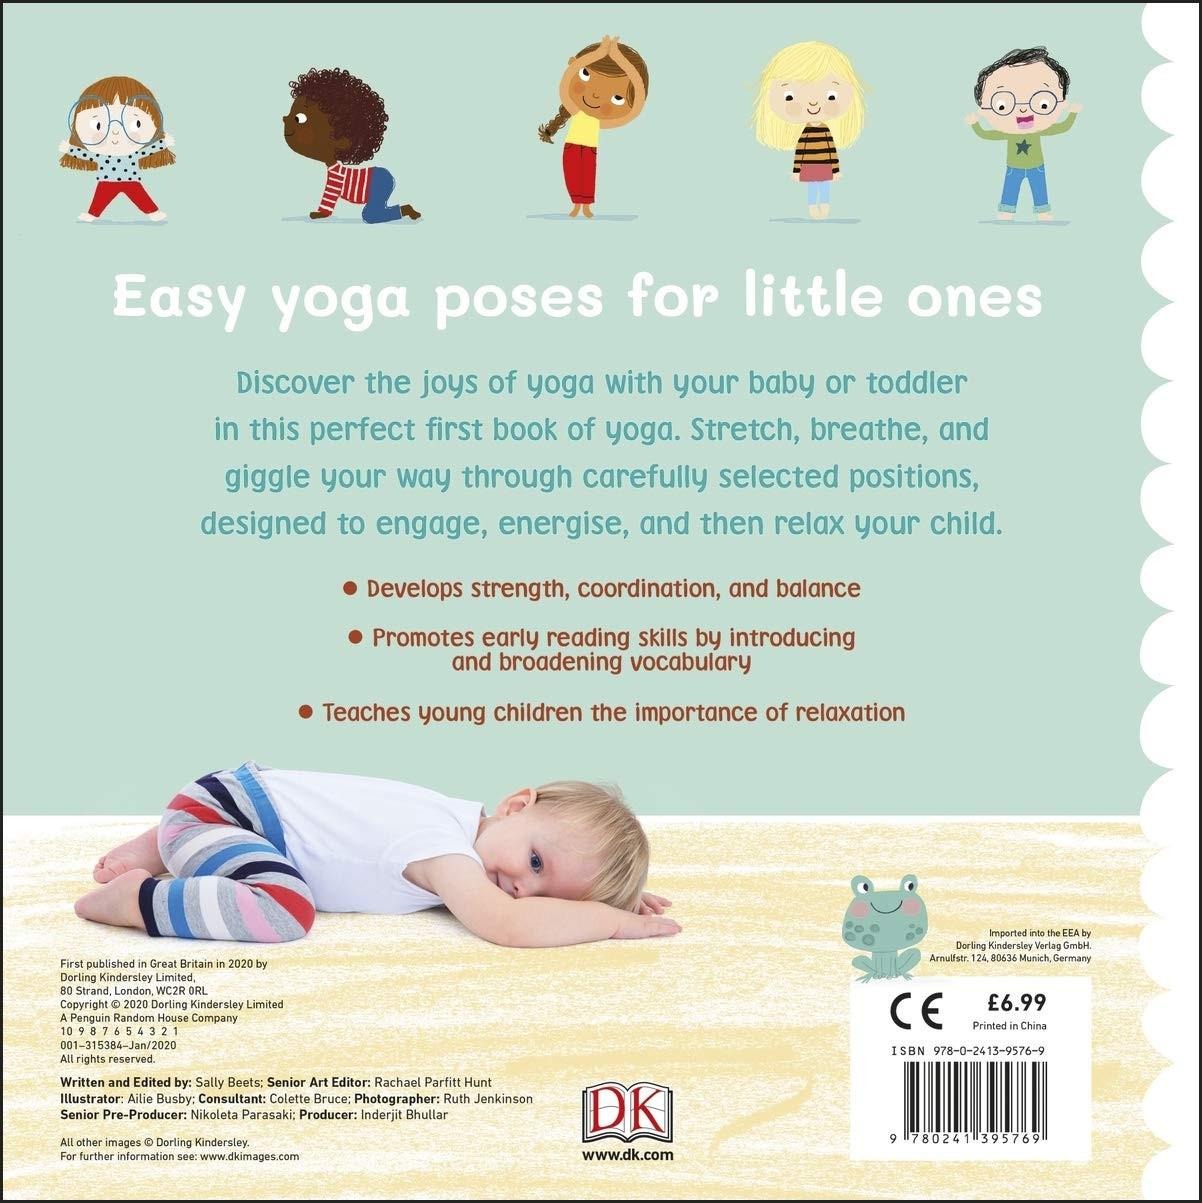 My First Yoga: Fun and Simple Yoga Poses for Babies and Toddlers